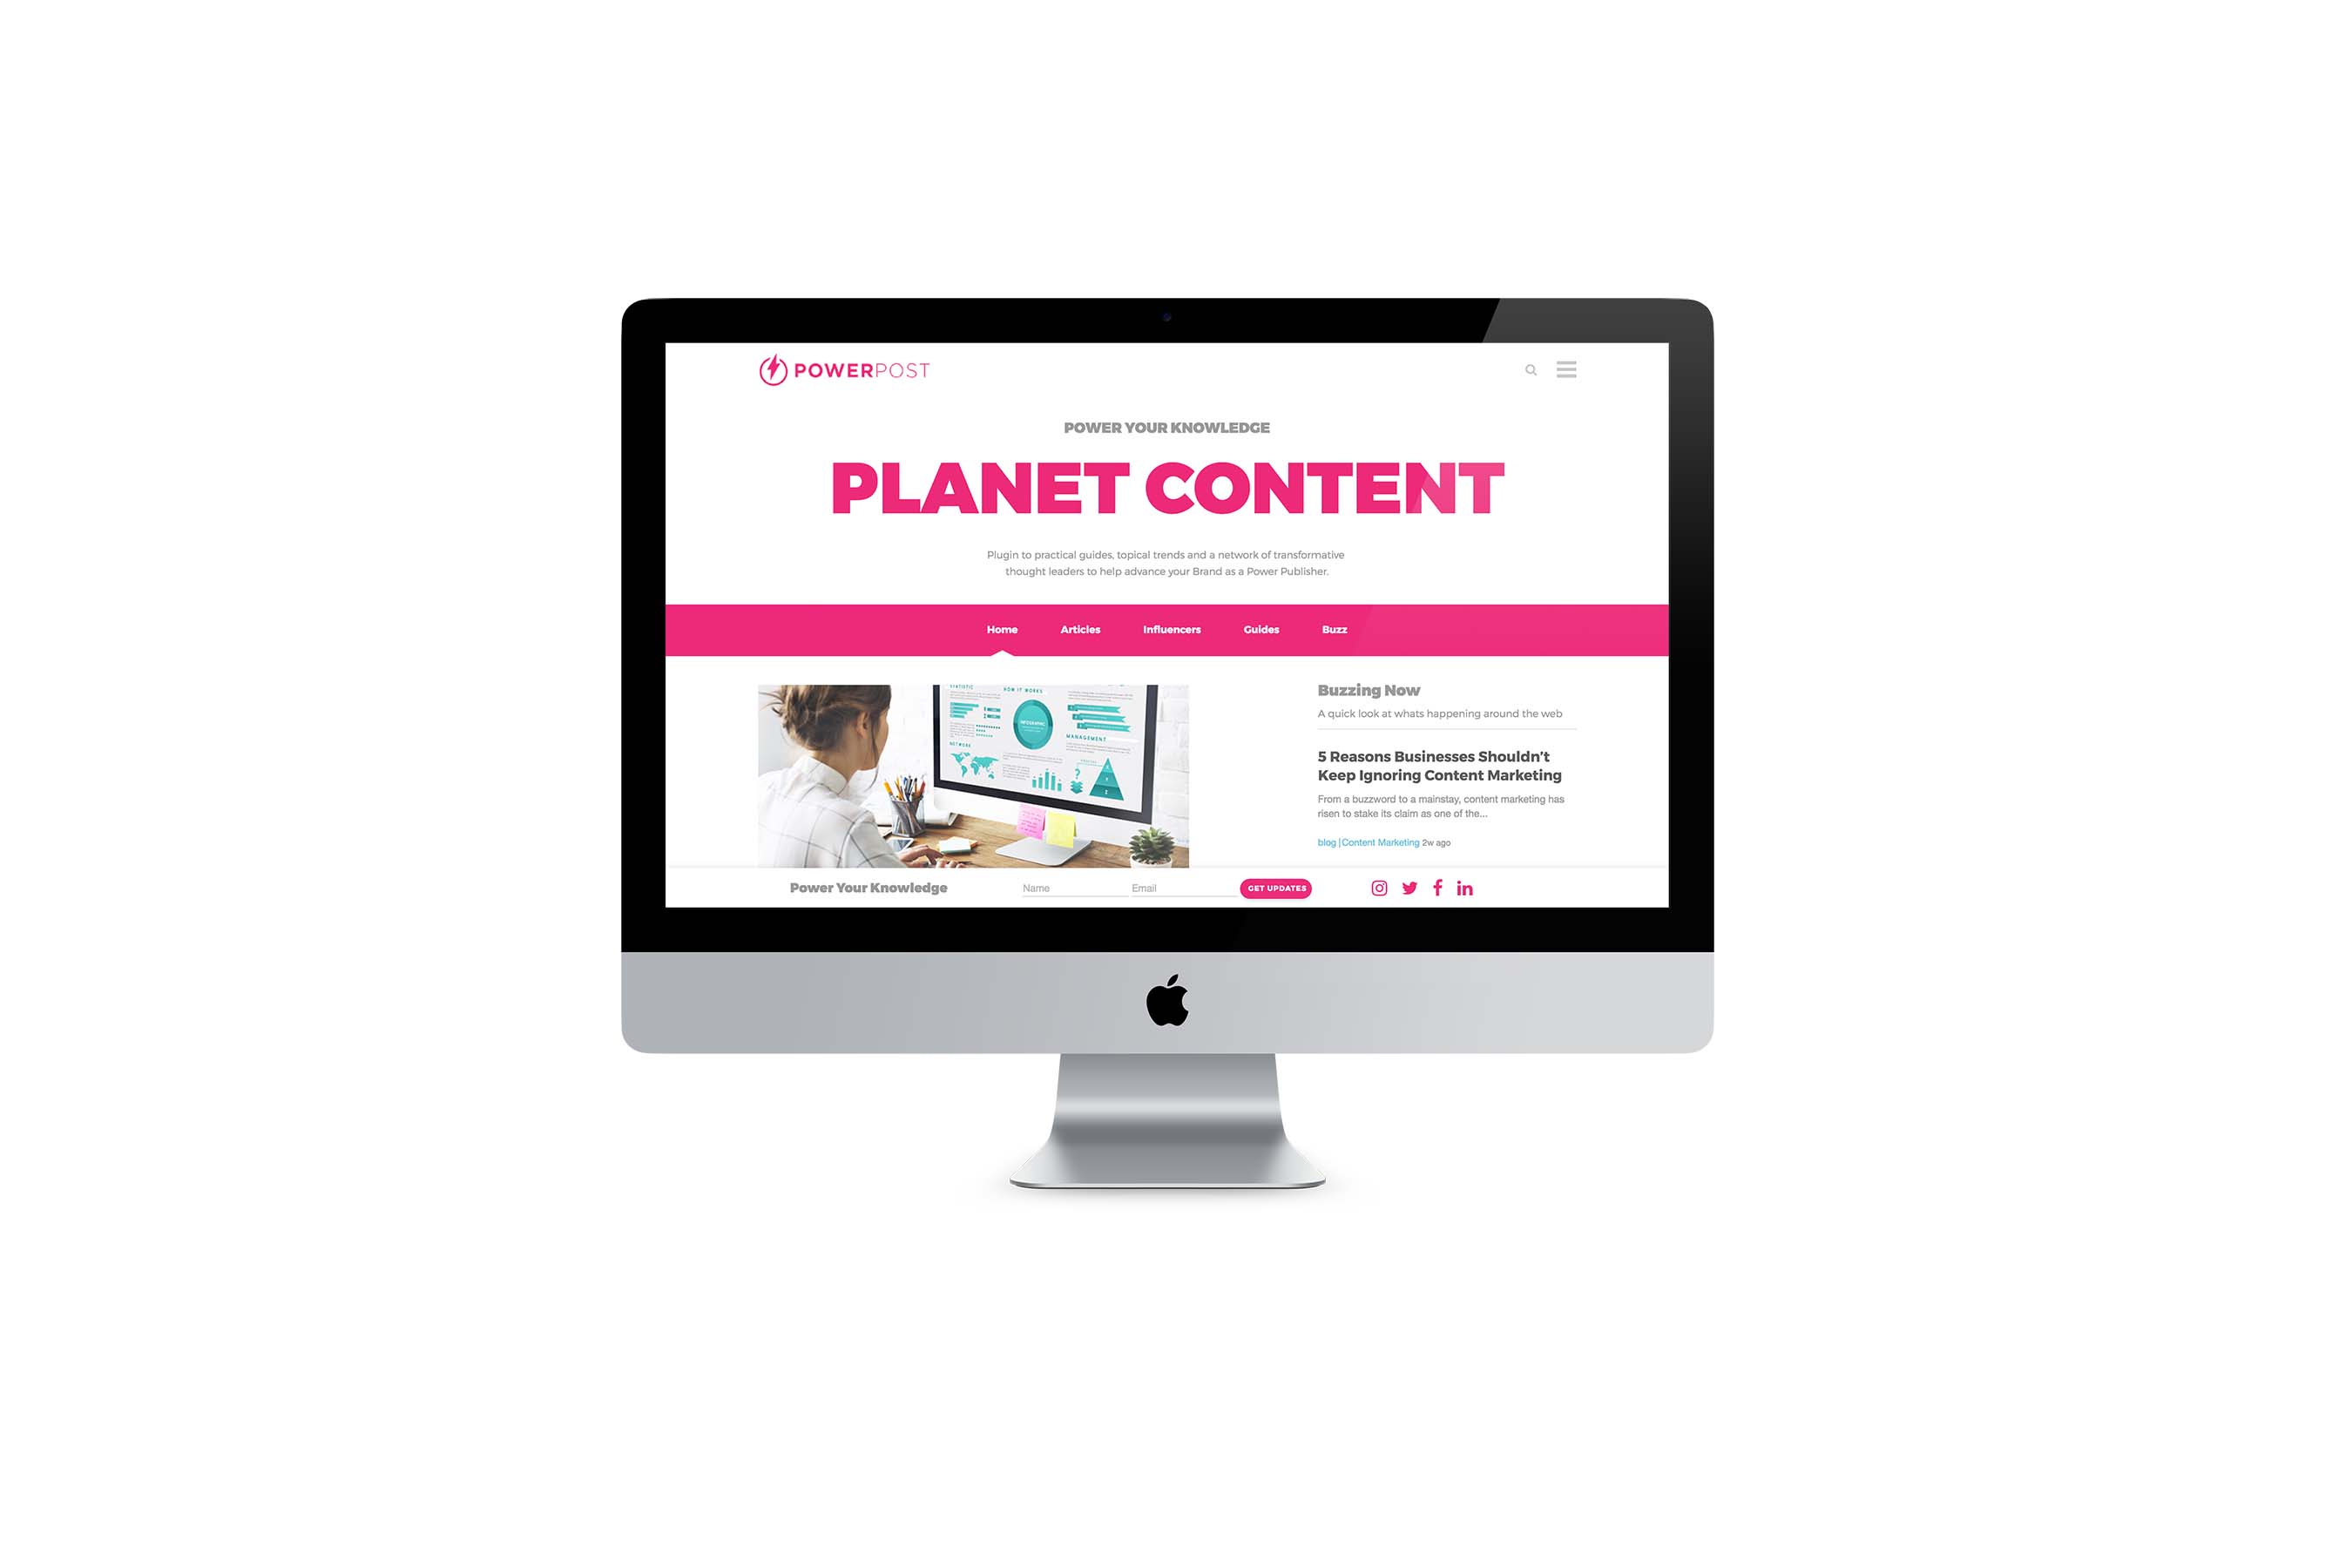 Planet Content is a great online magazine with access to guides, topical trends and a network of transformative thought leaders. Stay up-to-date with the industry with practical insights from our team.